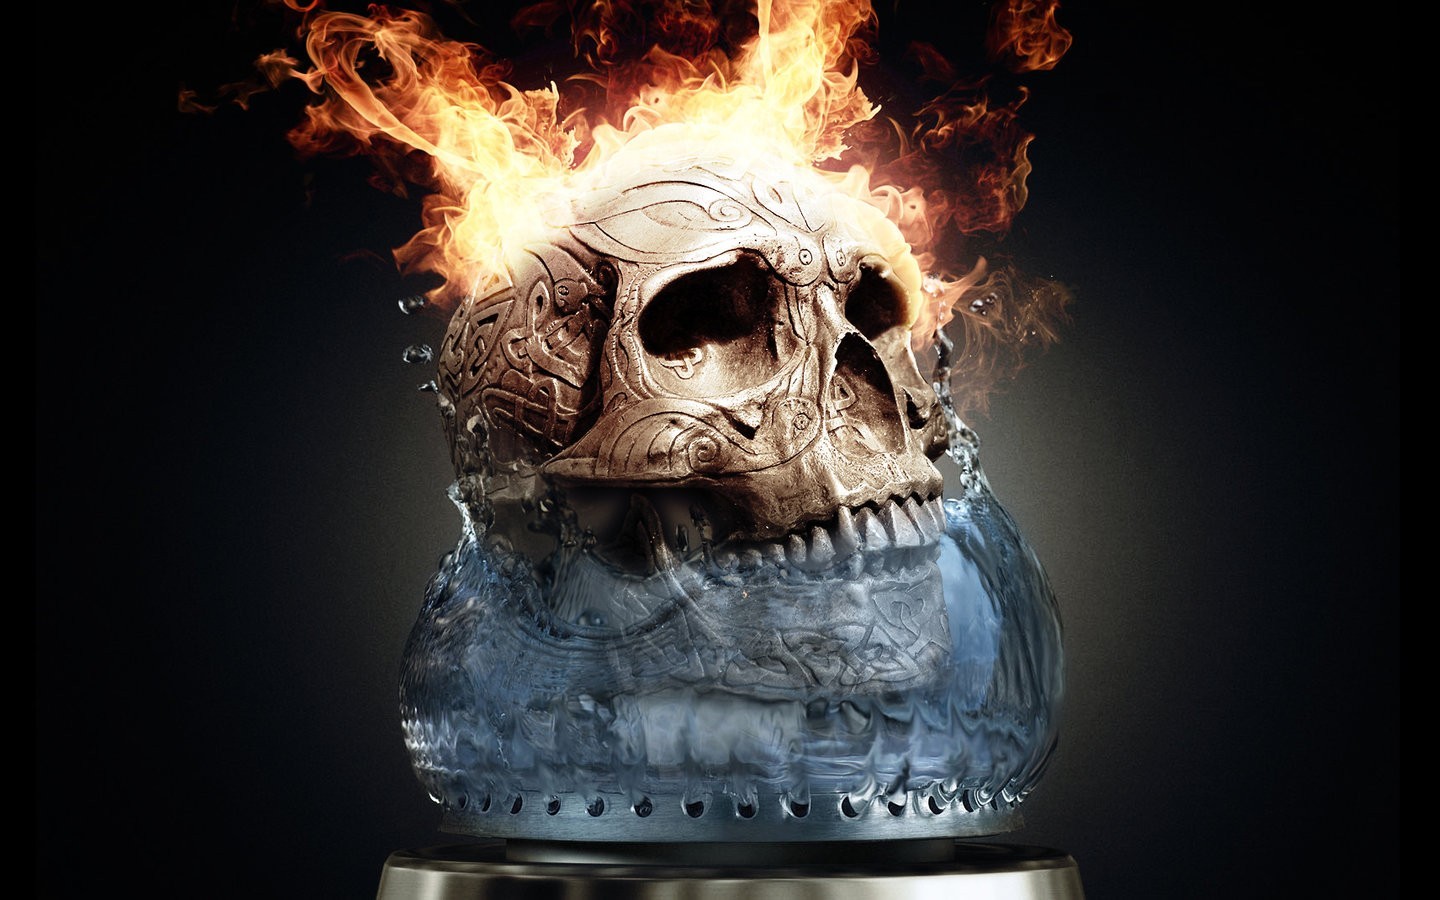 objects, death, skeletons, art, fire wallpapers for tablet